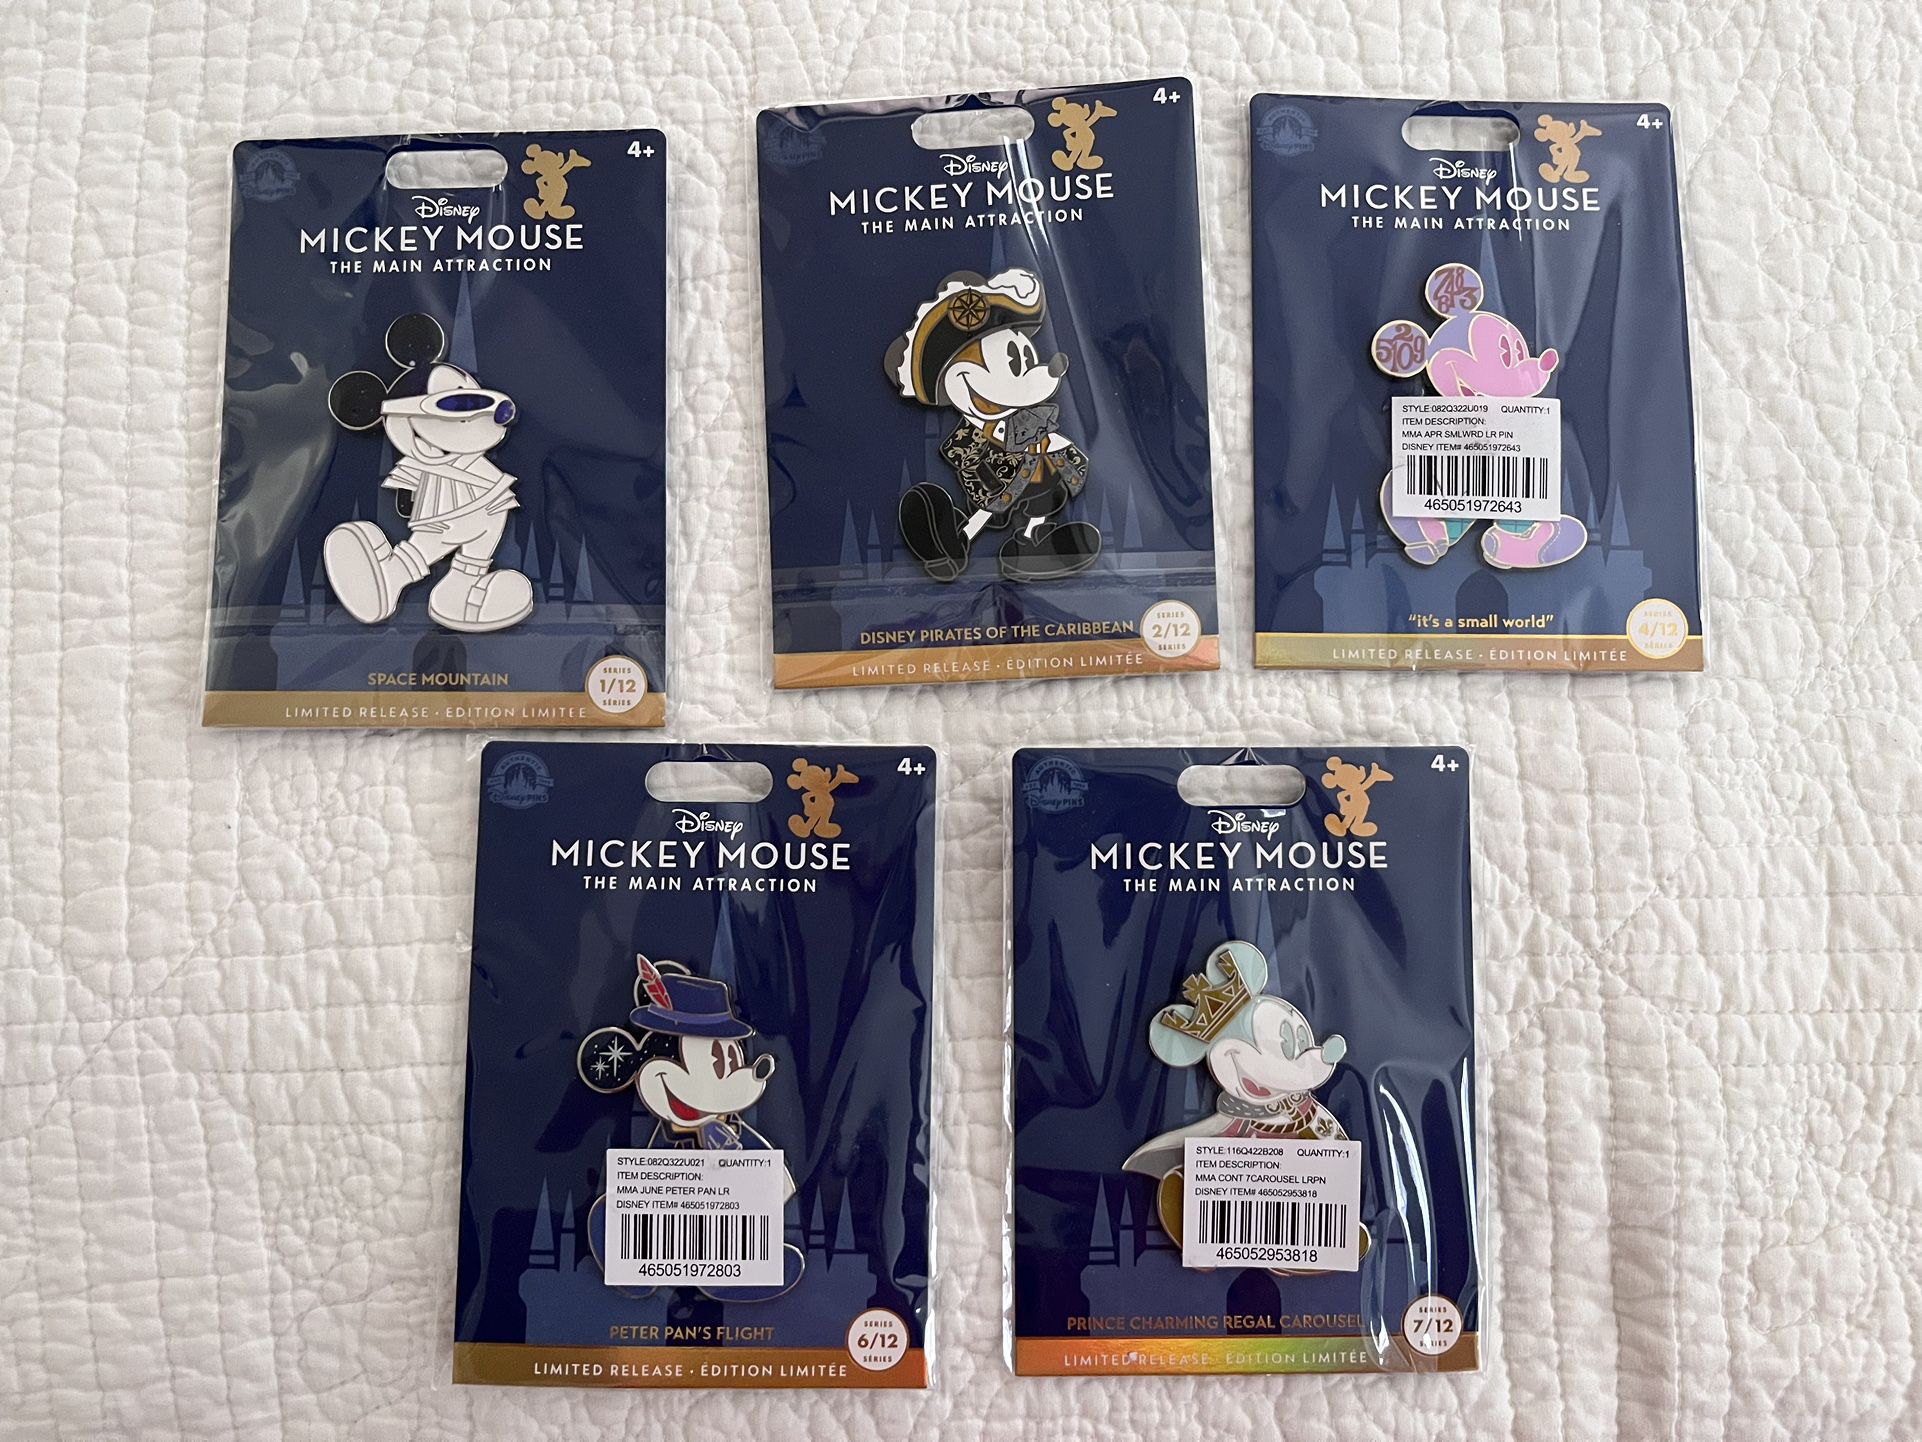 Disney Mickey Mouse The Main Attraction Pins -Set of 6 #1, #2, #3, #4, #6, #7NWT